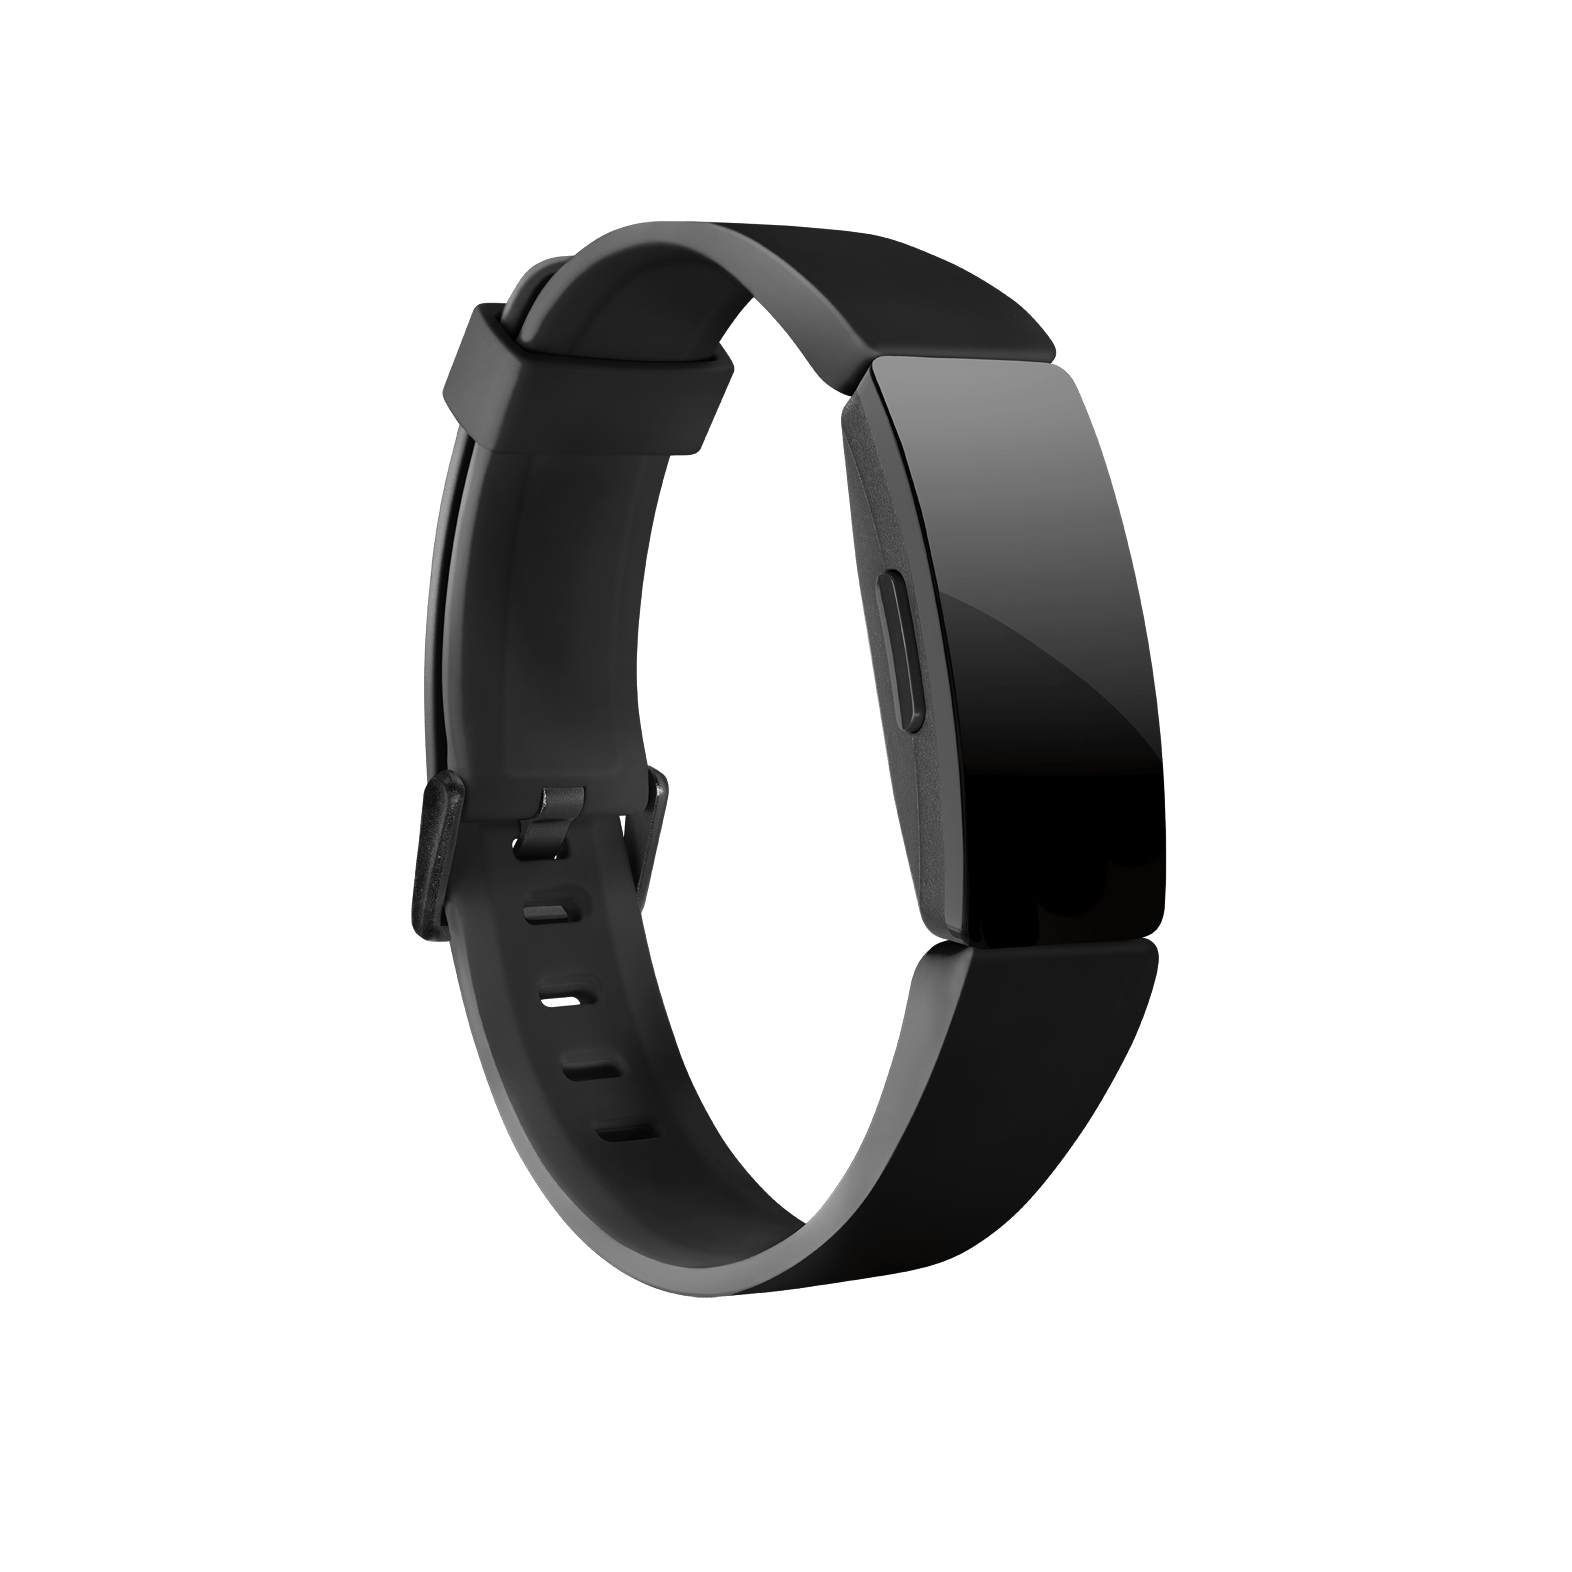 fitbit inspire hr stretch band